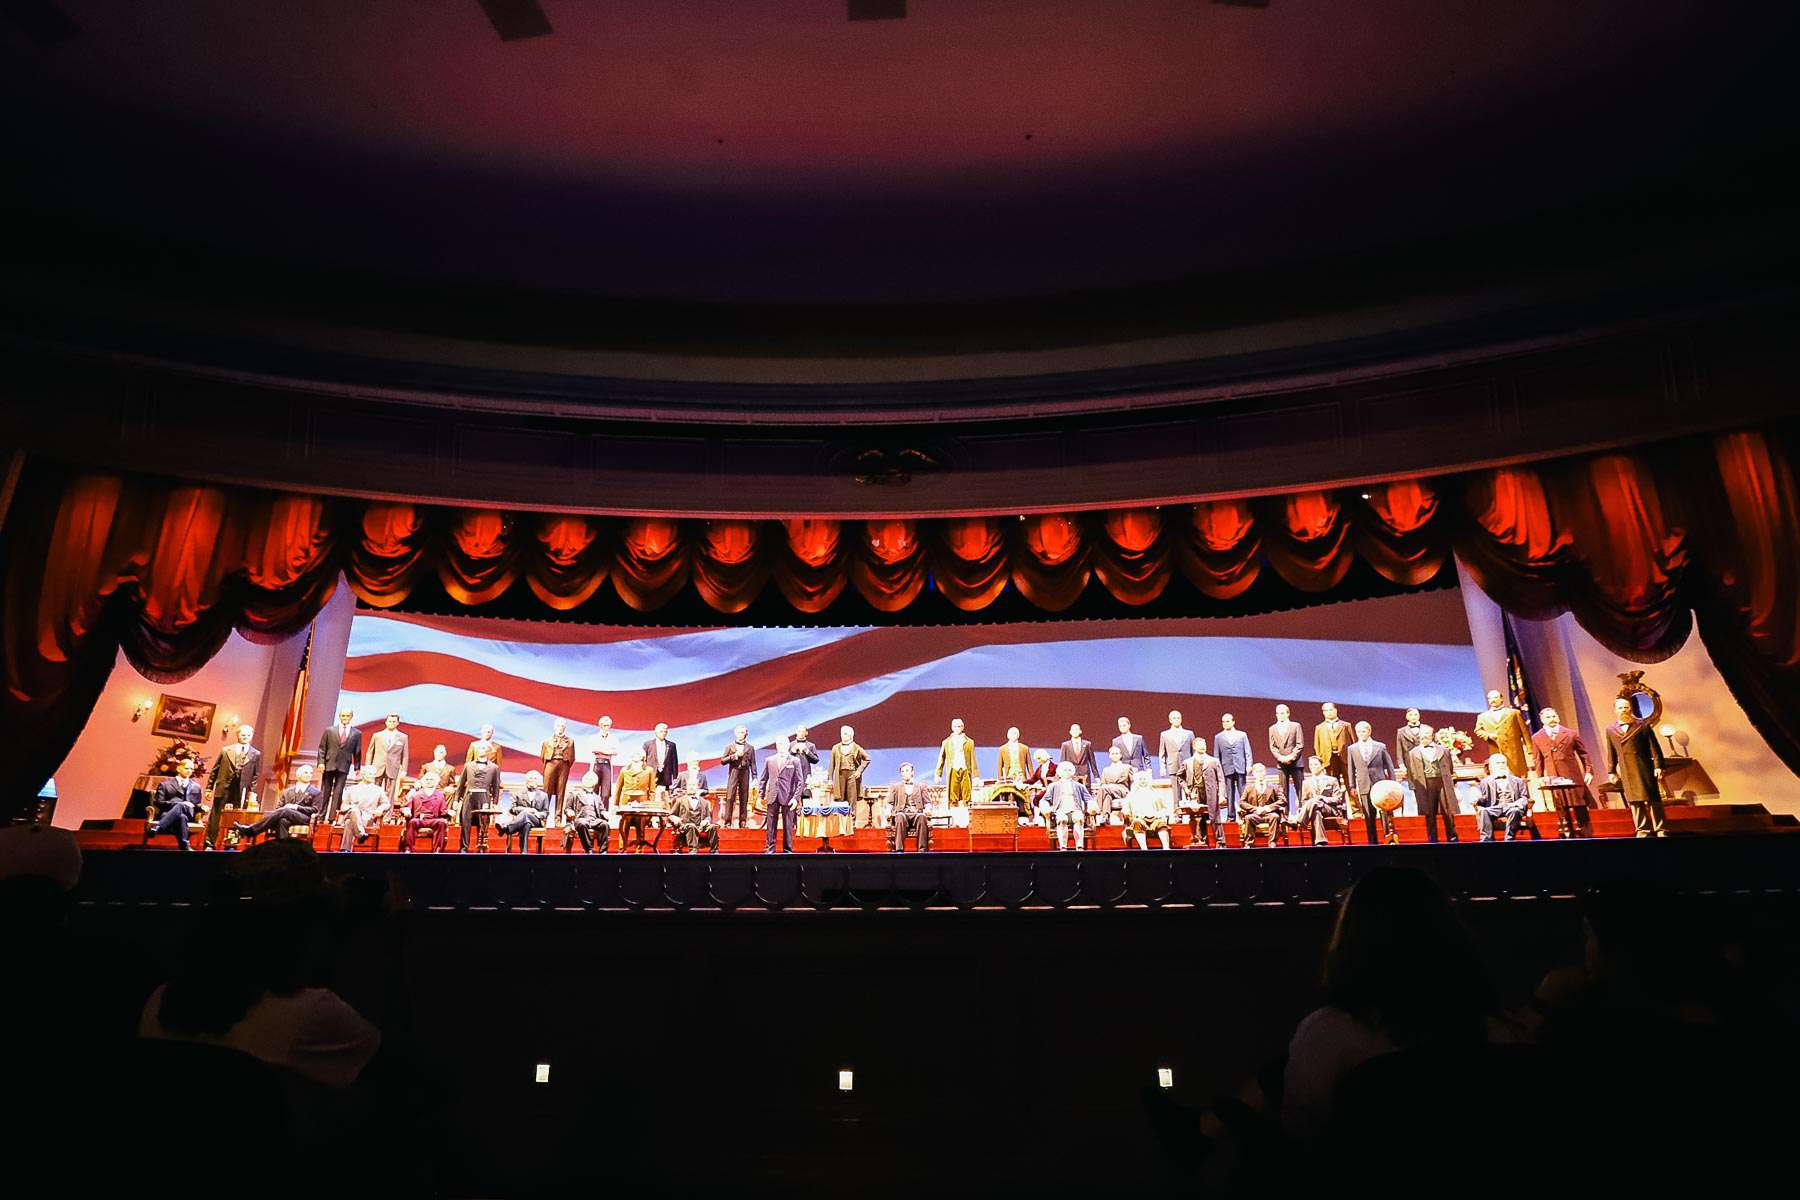 Presidents on stage at The Hall of Presidents. 